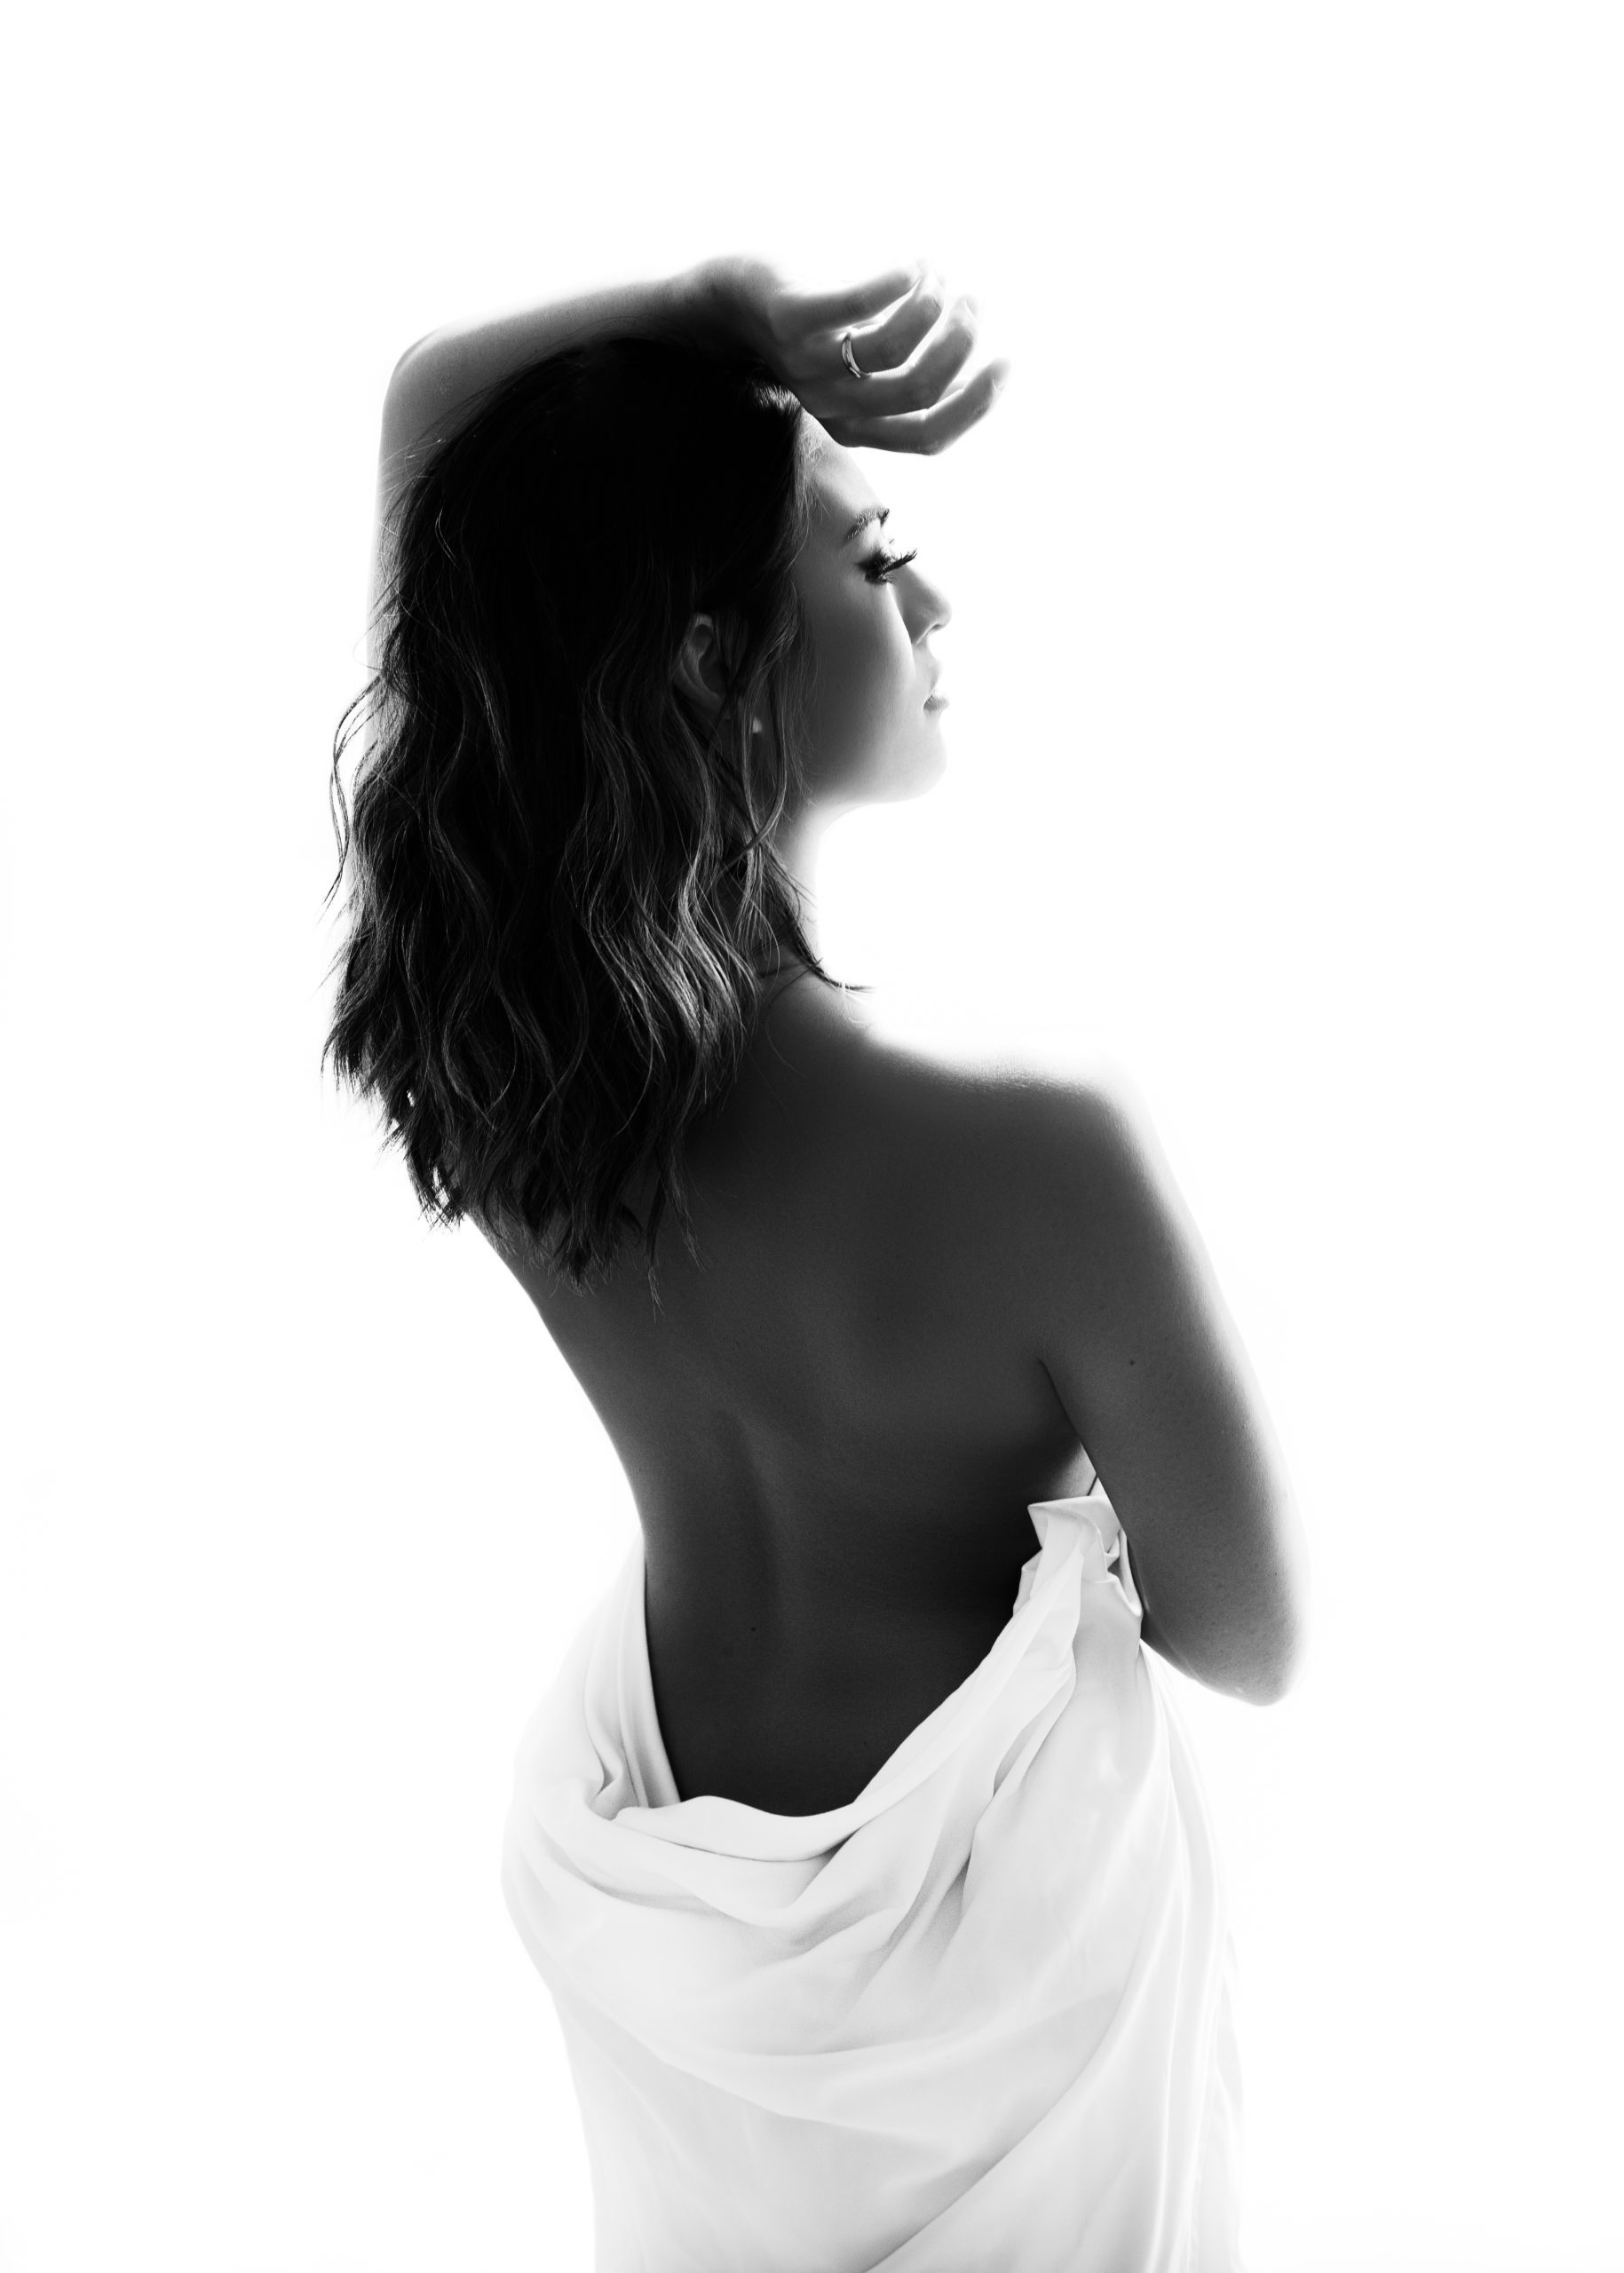 Tasteful nude boudoir Image of woman standing in a white sheet By Andrea Liora Studios in San Francisco